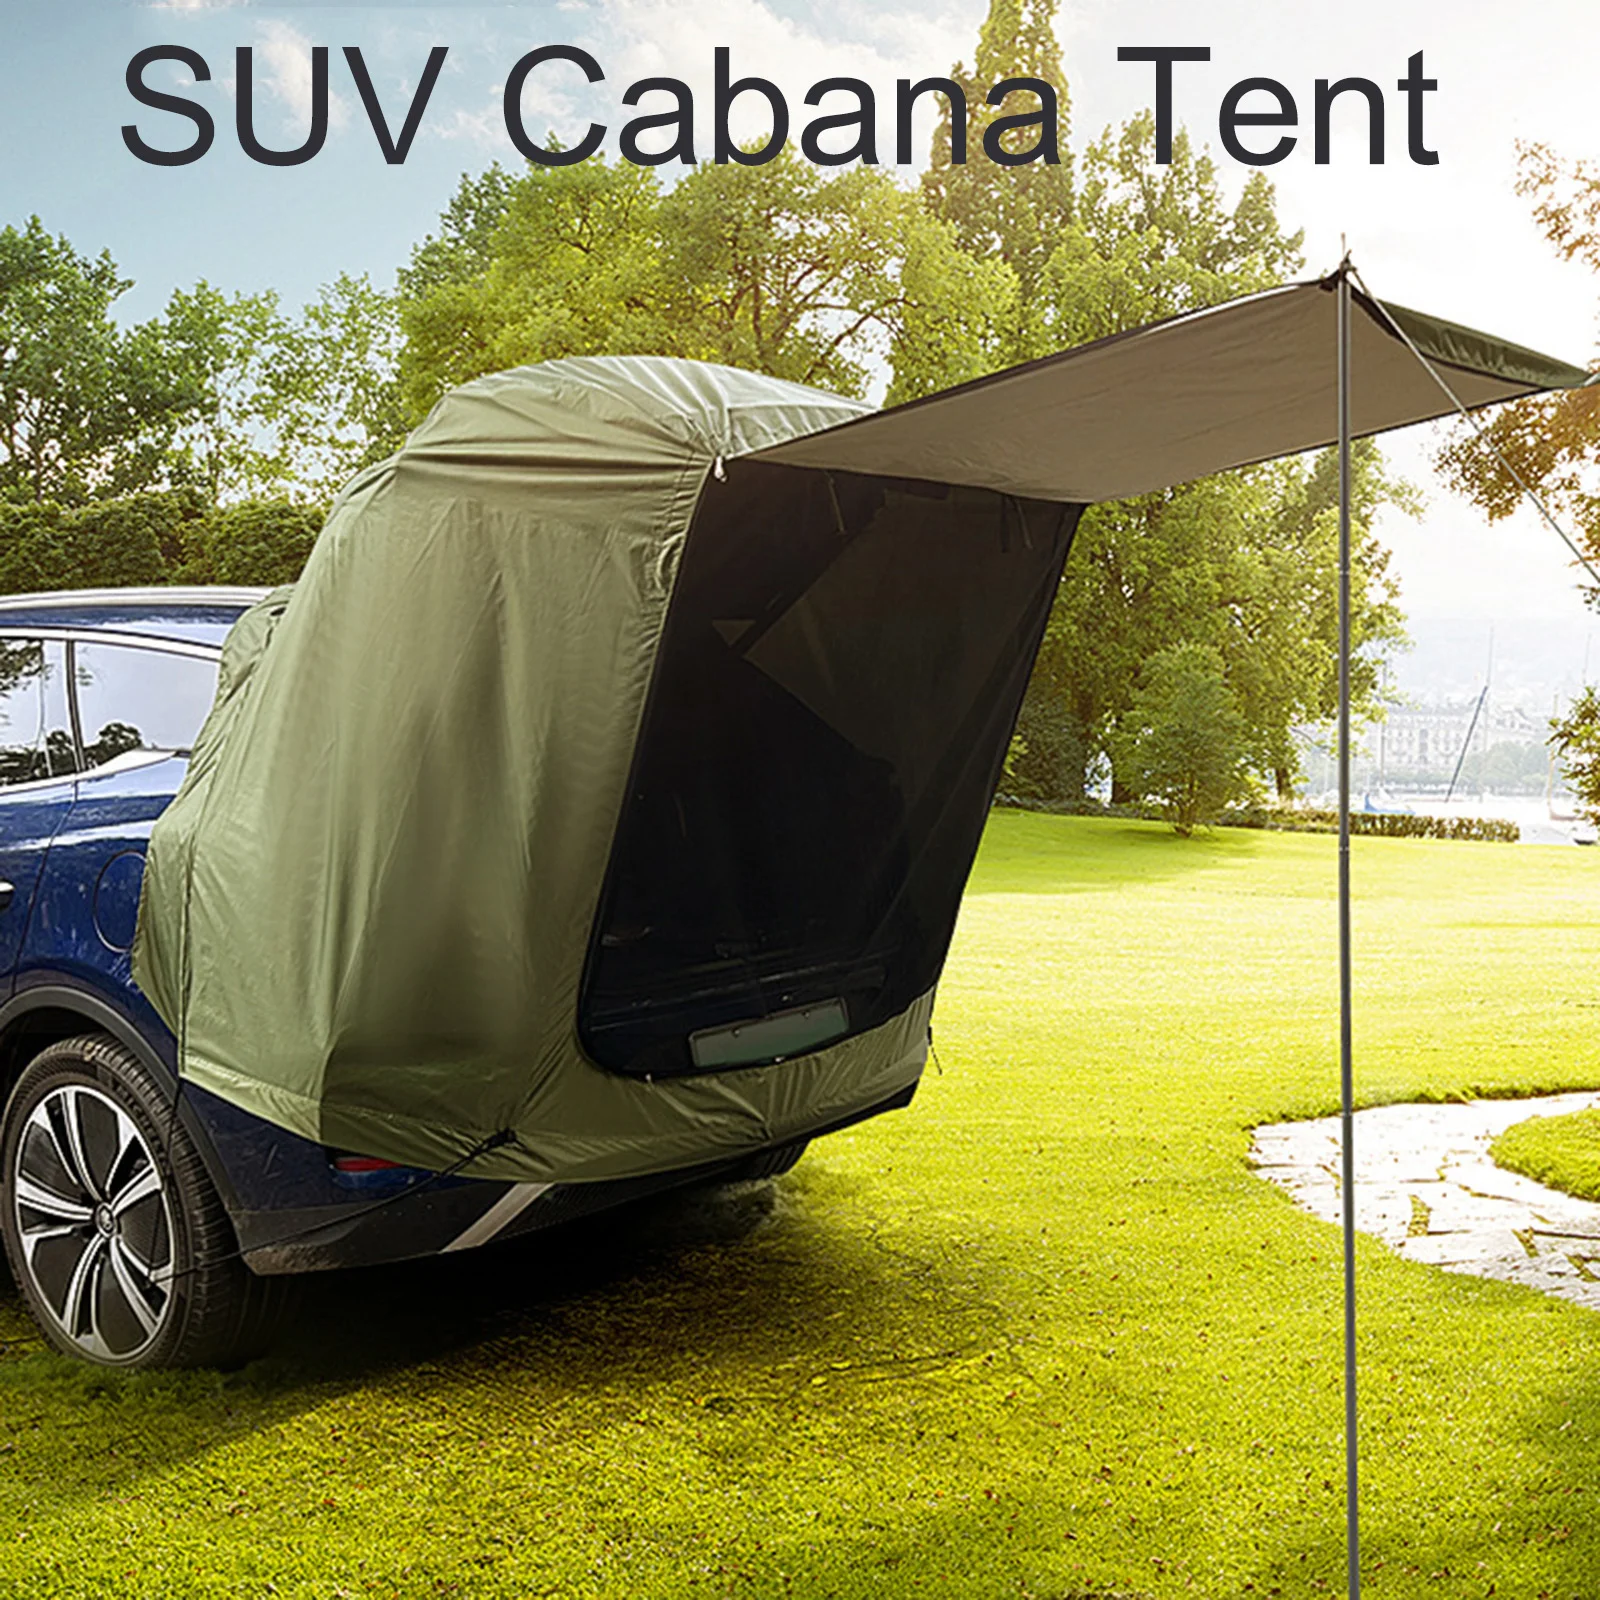 1set Camping Tent Kits SUV Cabana Tent with Awning Shade Large Space Wide Vision - £46.46 GBP